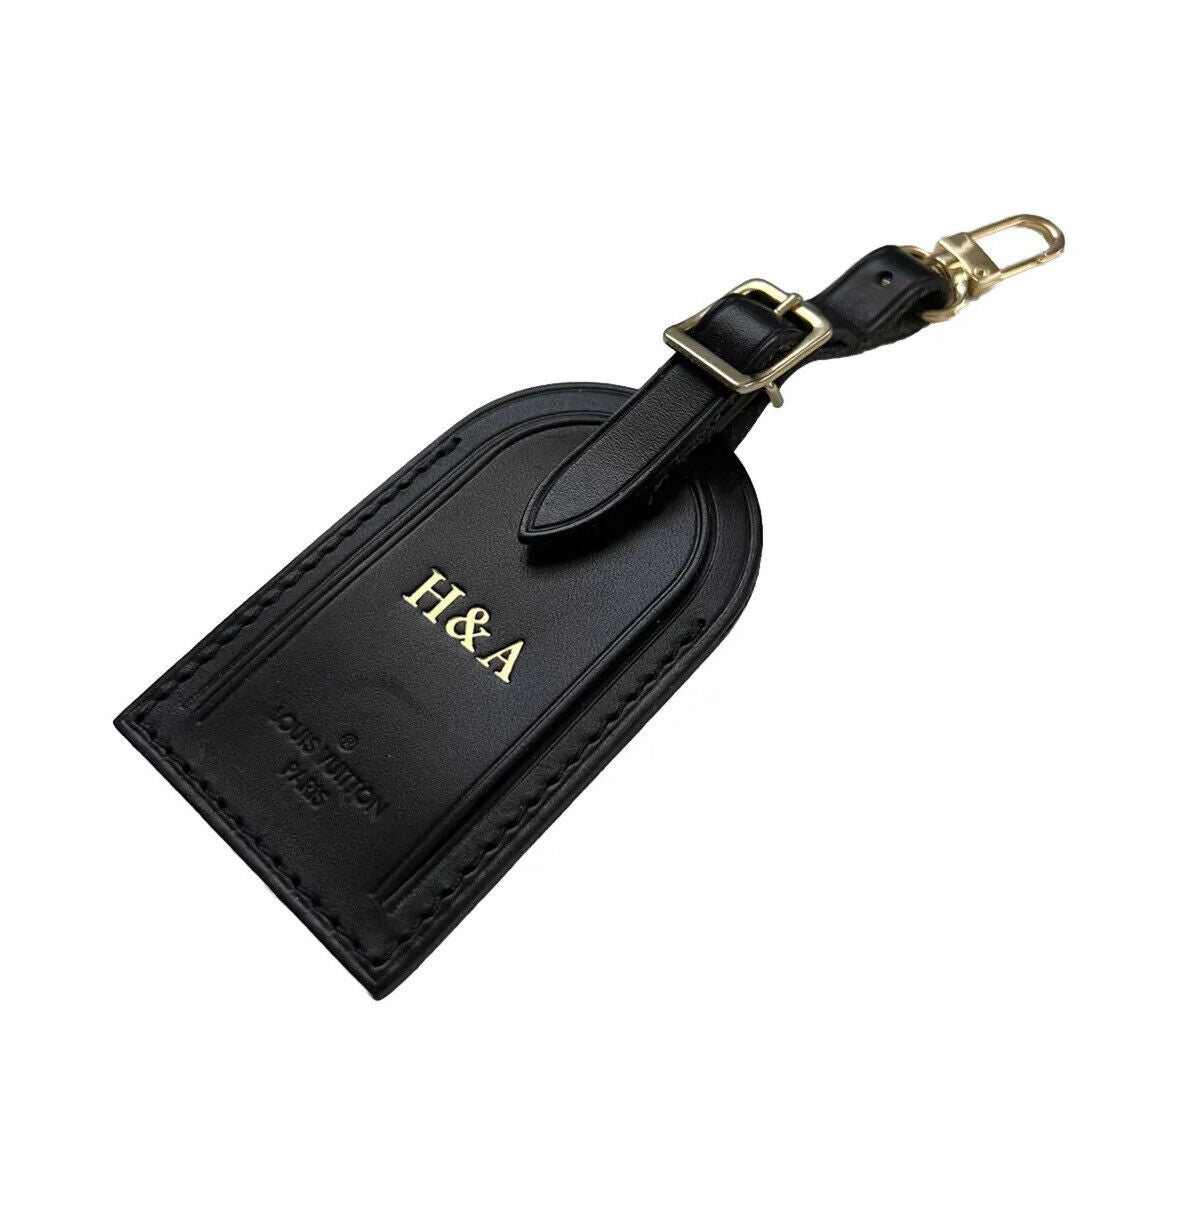 Louis Vuitton Luggage Tag w/ H & A Stamped Initials Goldtone Black Leather UEC